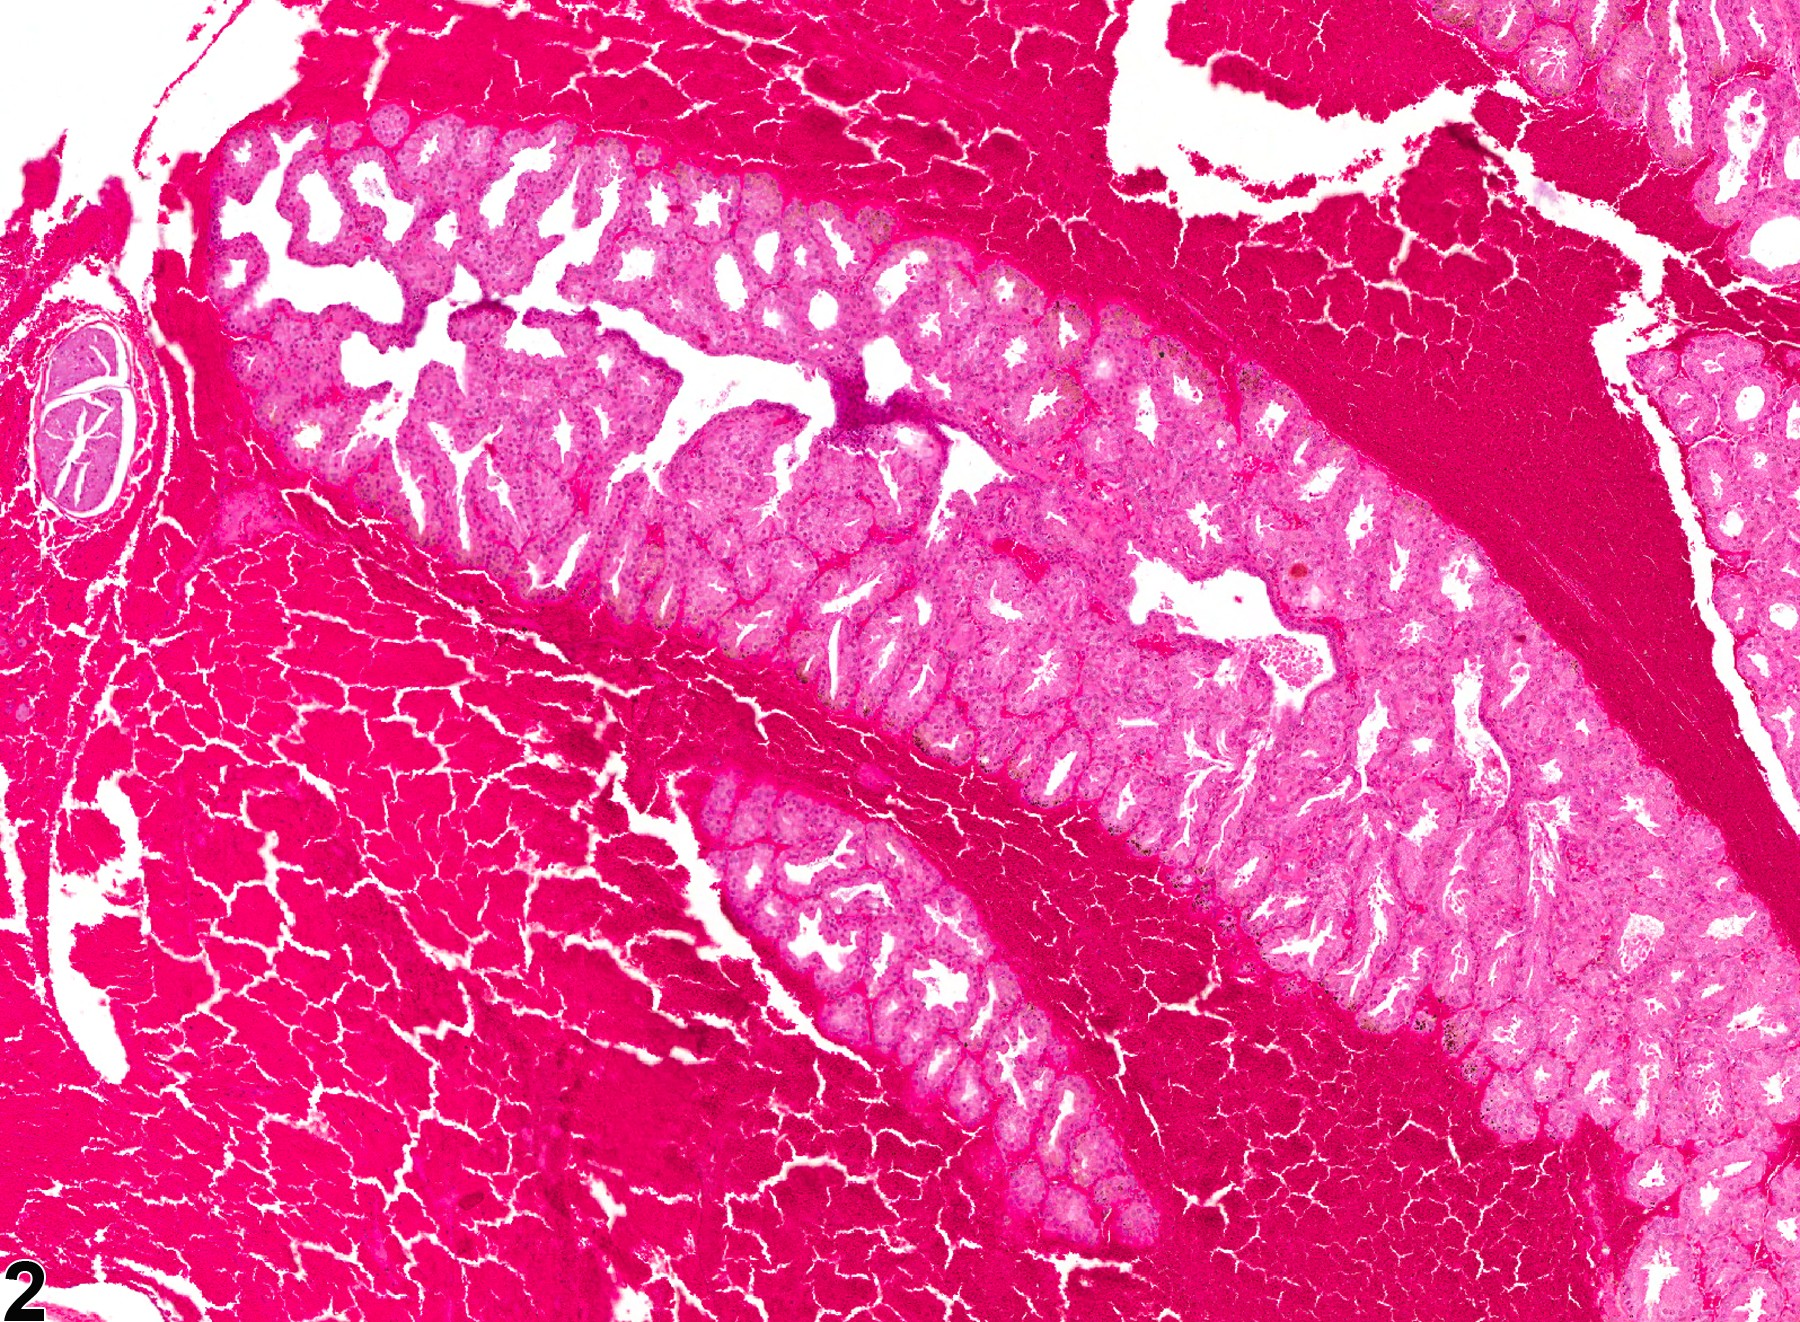 Image of hemorrhage in the Harderian gland from a male F344/N rat in a chronic study